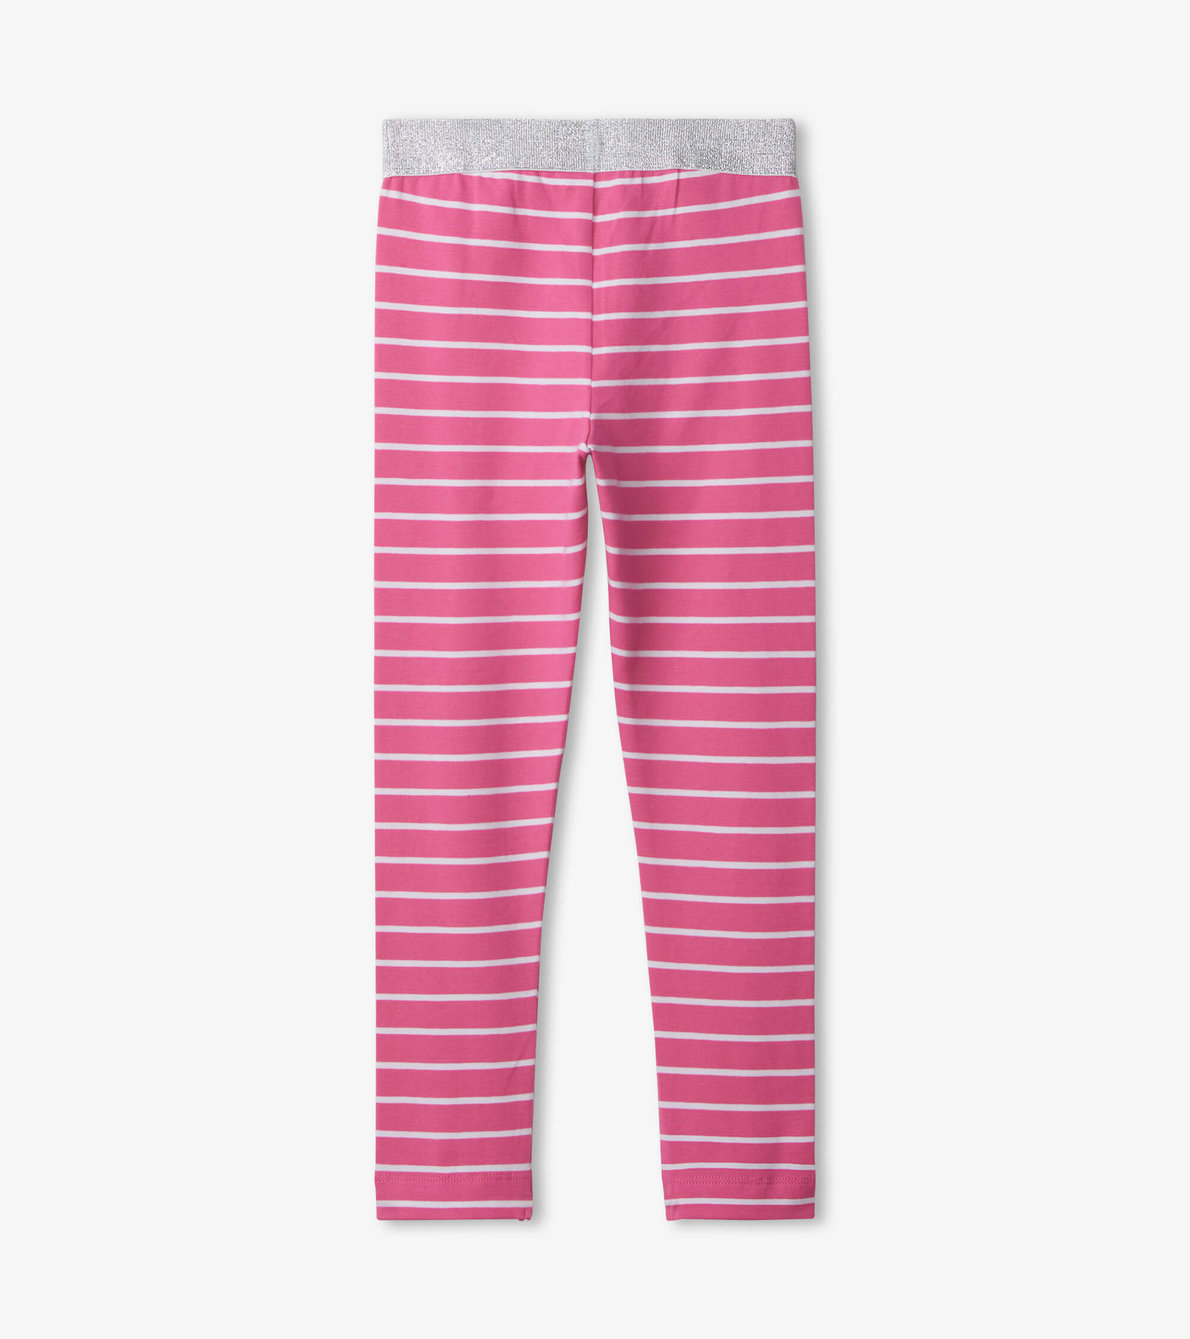 View larger image of Cotton Candy Stripes Fun Waist Leggings